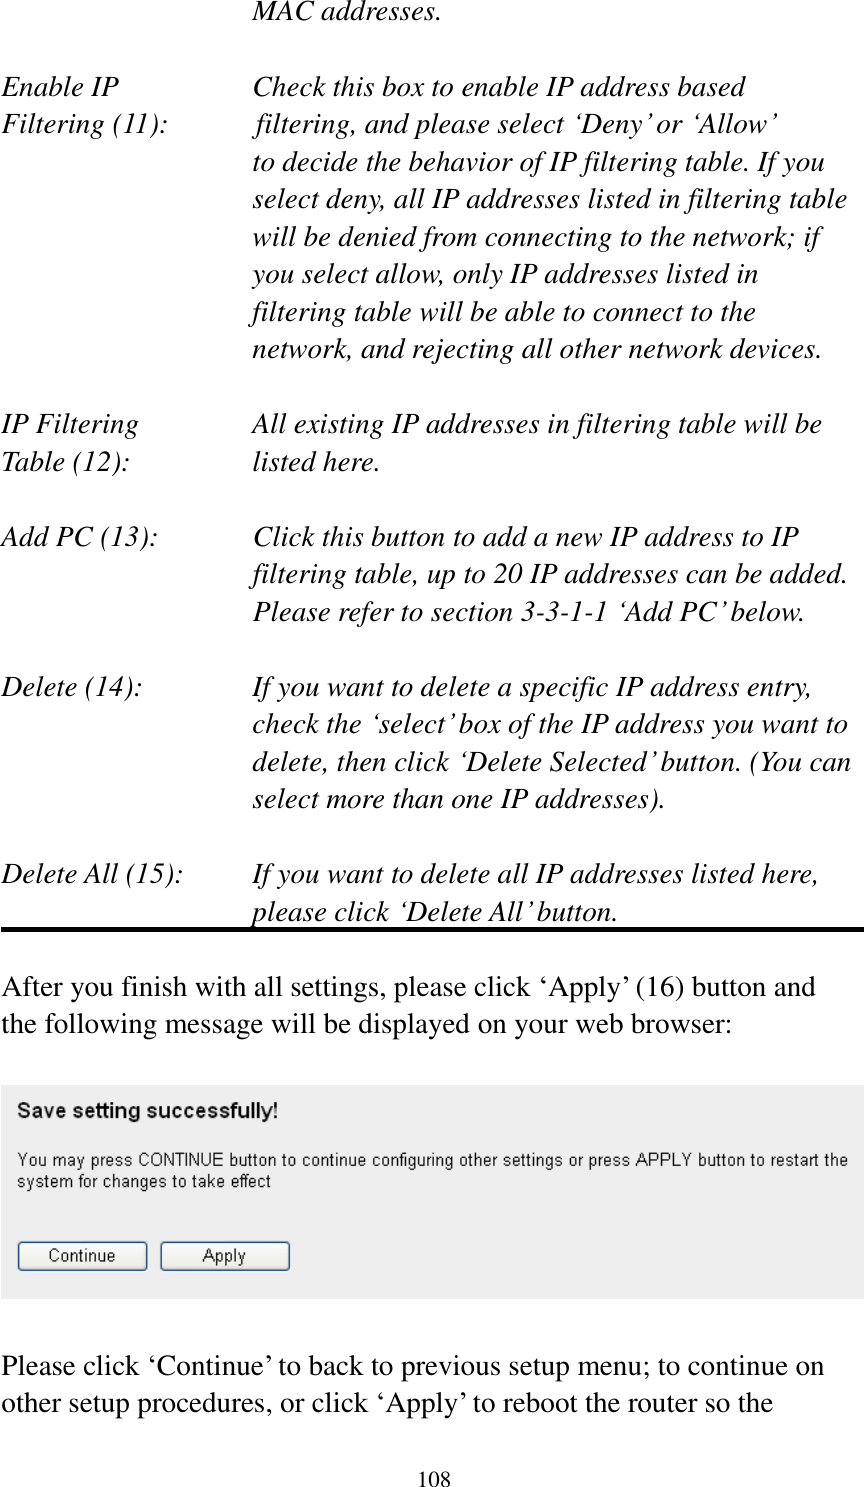 108 MAC addresses.  Enable IP        Check this box to enable IP address based Filtering (11):       filtering, and please select „Deny‟ or „Allow‟   to decide the behavior of IP filtering table. If you select deny, all IP addresses listed in filtering table will be denied from connecting to the network; if you select allow, only IP addresses listed in filtering table will be able to connect to the network, and rejecting all other network devices.  IP Filtering      All existing IP addresses in filtering table will be Table (12):       listed here.  Add PC (13):    Click this button to add a new IP address to IP filtering table, up to 20 IP addresses can be added.   Please refer to section 3-3-1-1 „Add PC‟ below.    Delete (14):      If you want to delete a specific IP address entry,     check the „select‟ box of the IP address you want to delete, then click „Delete Selected‟ button. (You can select more than one IP addresses).  Delete All (15):    If you want to delete all IP addresses listed here, please click „Delete All‟ button.  After you finish with all settings, please click „Apply‟ (16) button and the following message will be displayed on your web browser:    Please click „Continue‟ to back to previous setup menu; to continue on other setup procedures, or click „Apply‟ to reboot the router so the 